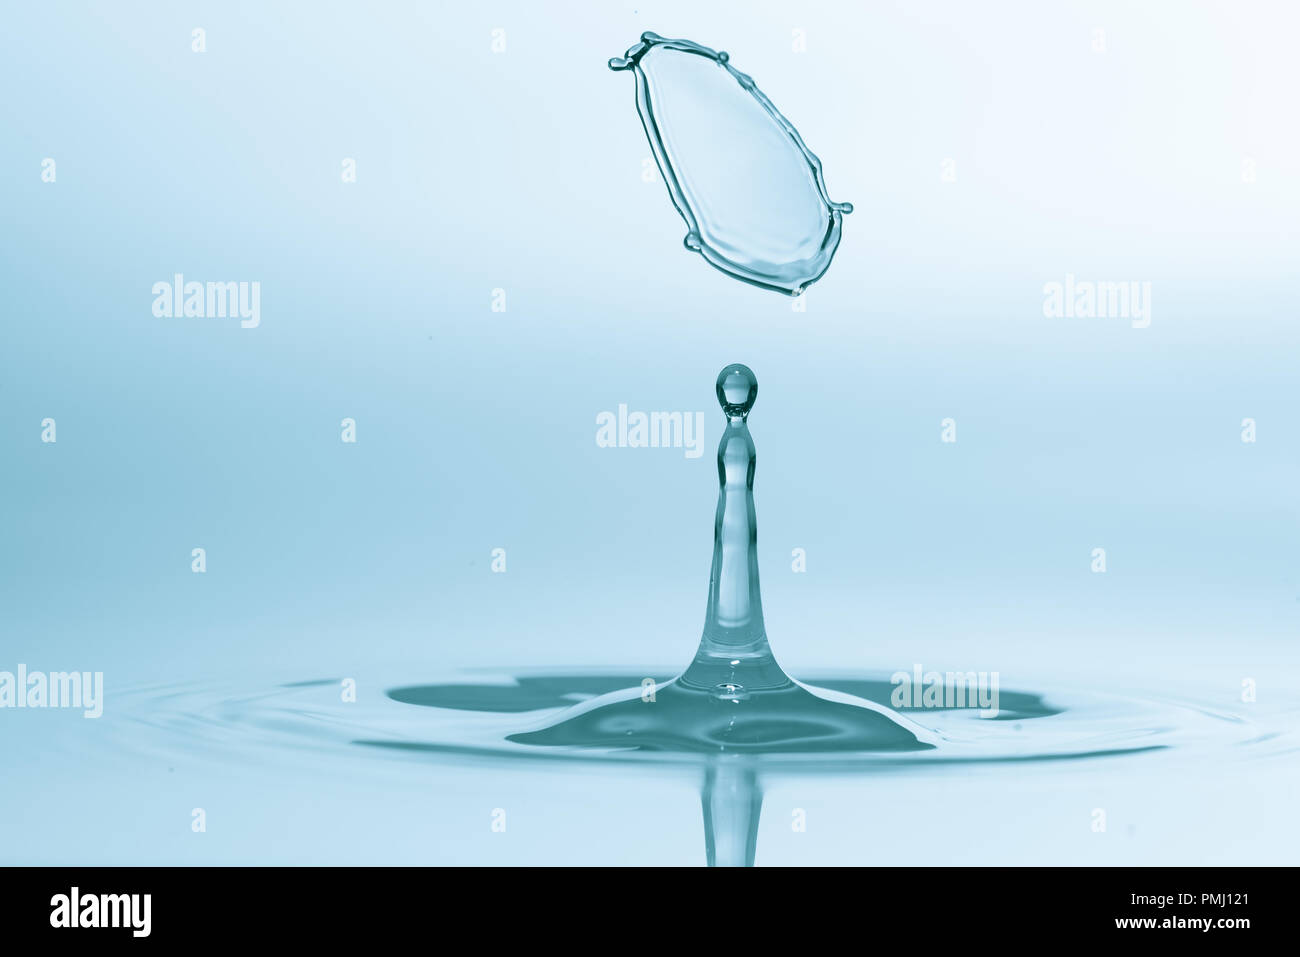 Collision of falling water droplets Stock Photo